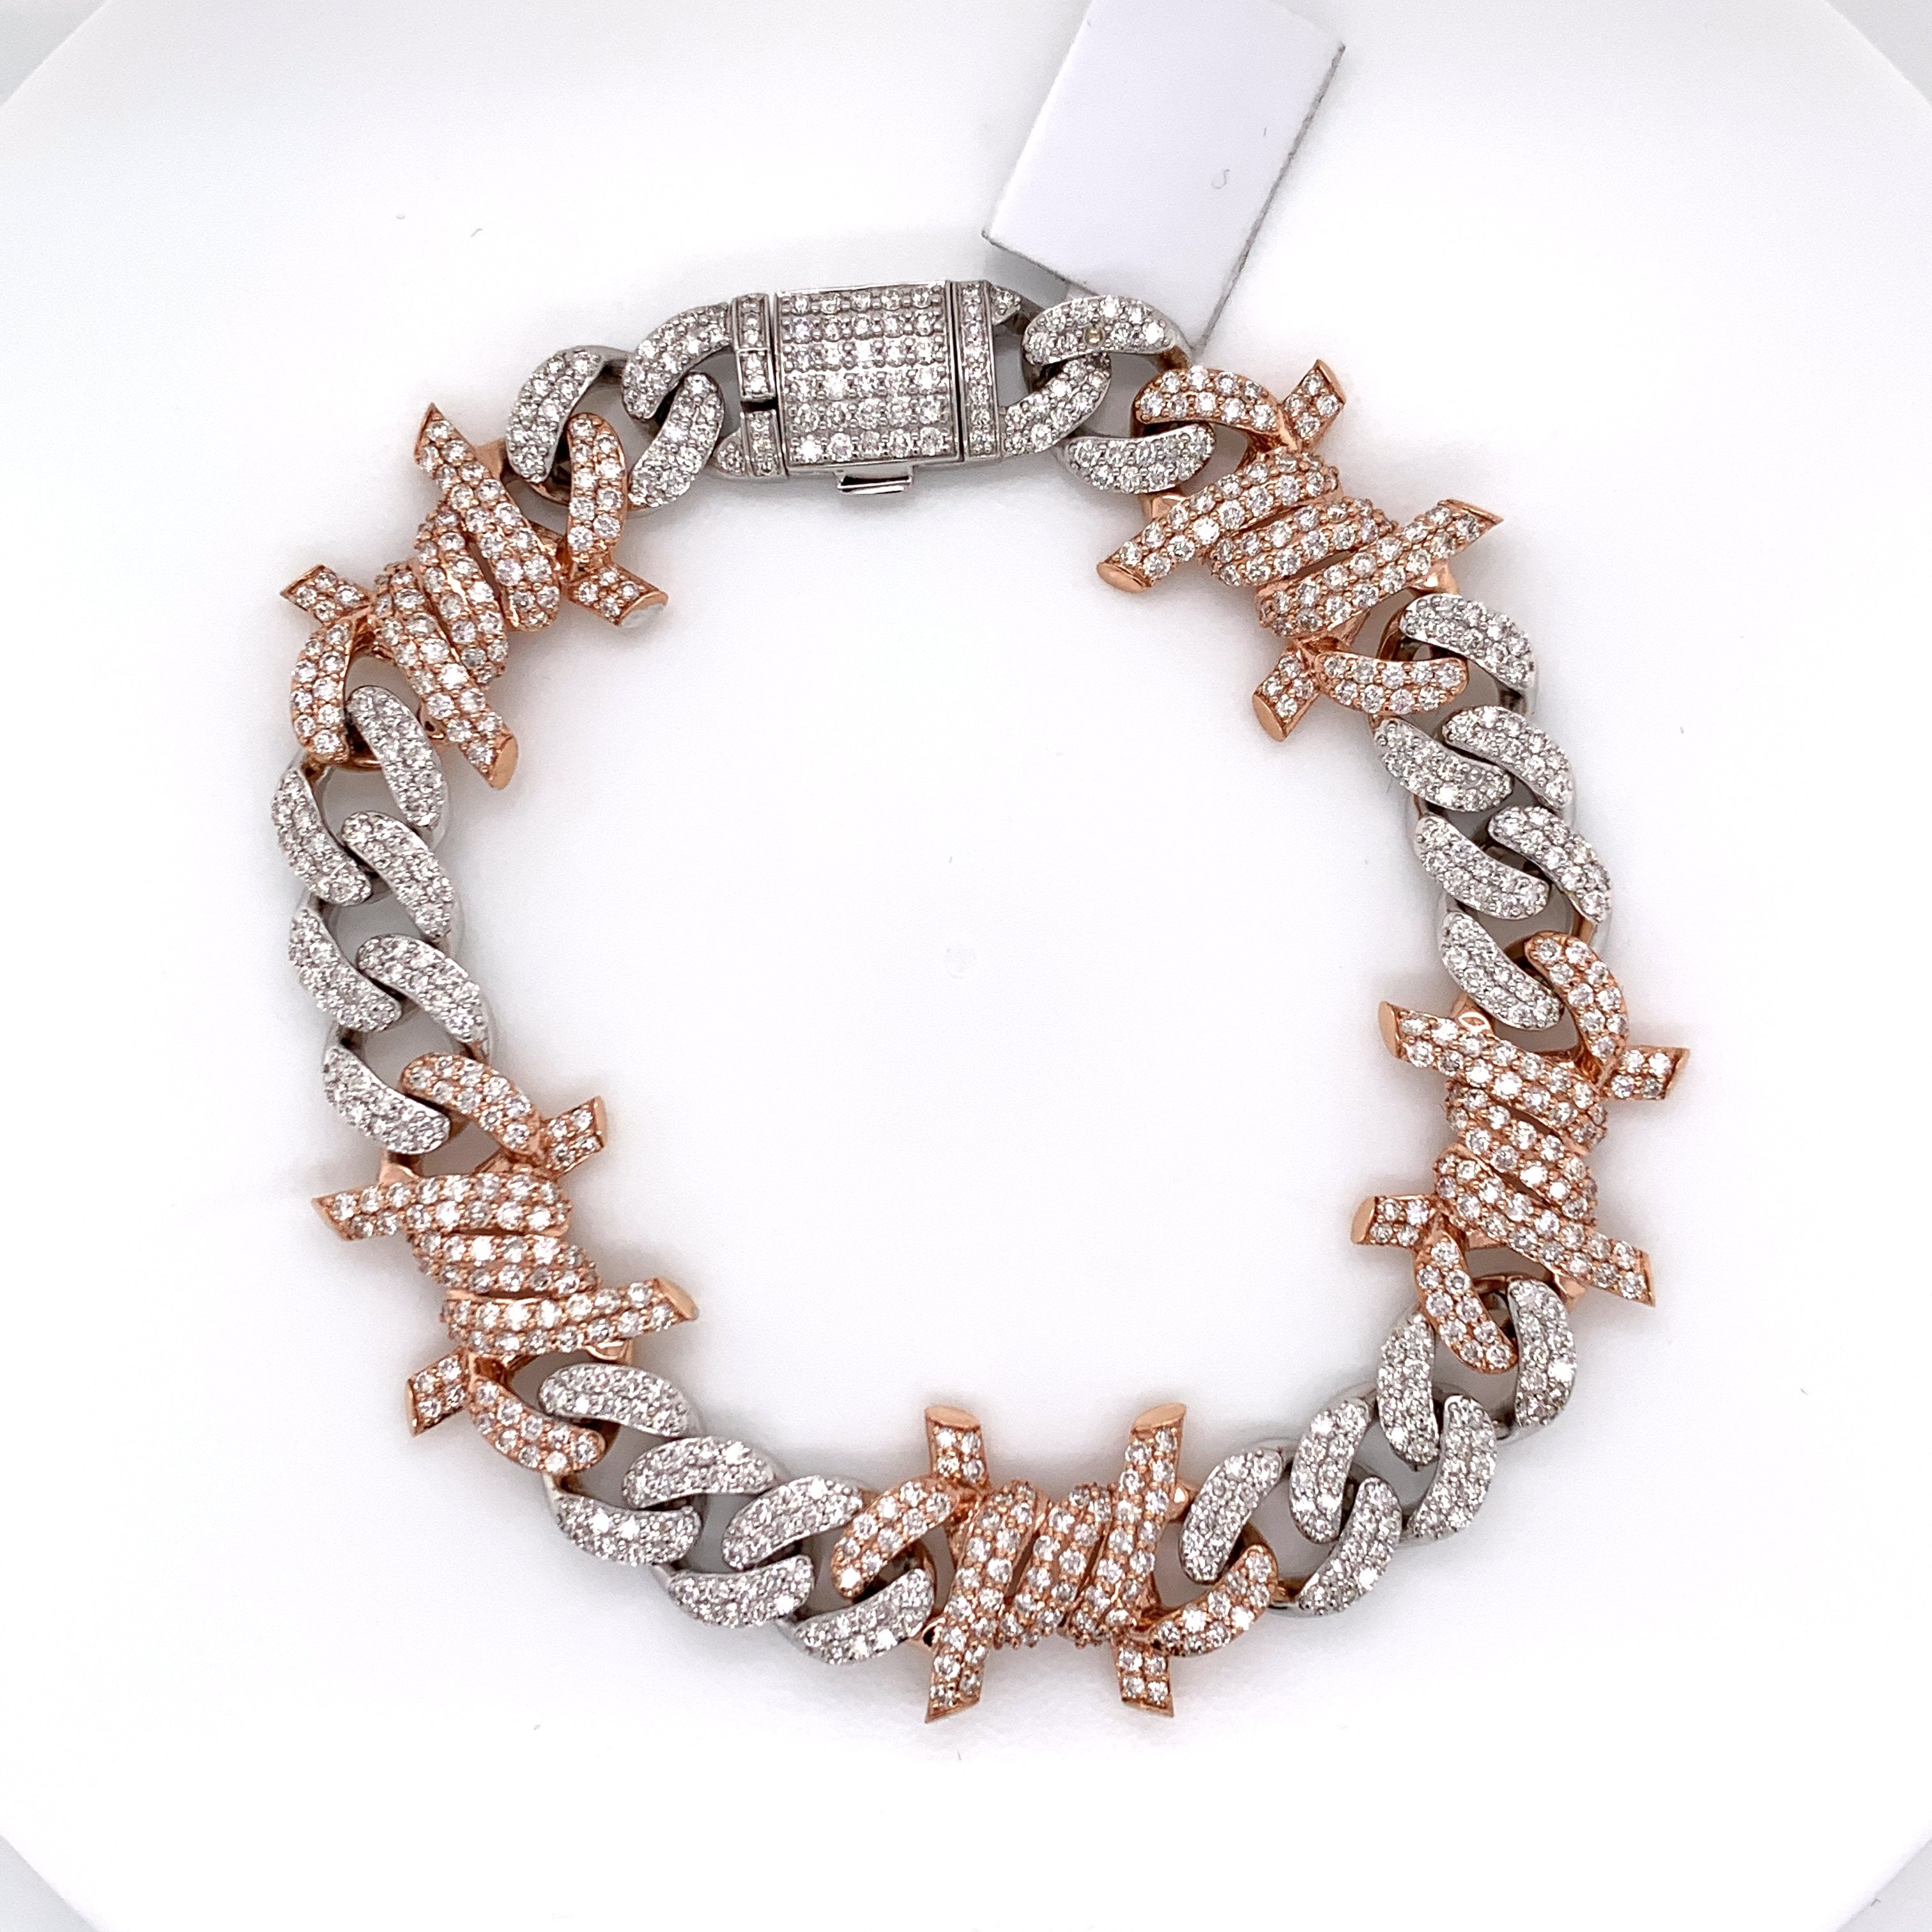 8.44CT Diamond Barbed Wire Cuban Bracelet in 14K Rose and White Gold - 18mm - White Carat Diamonds 